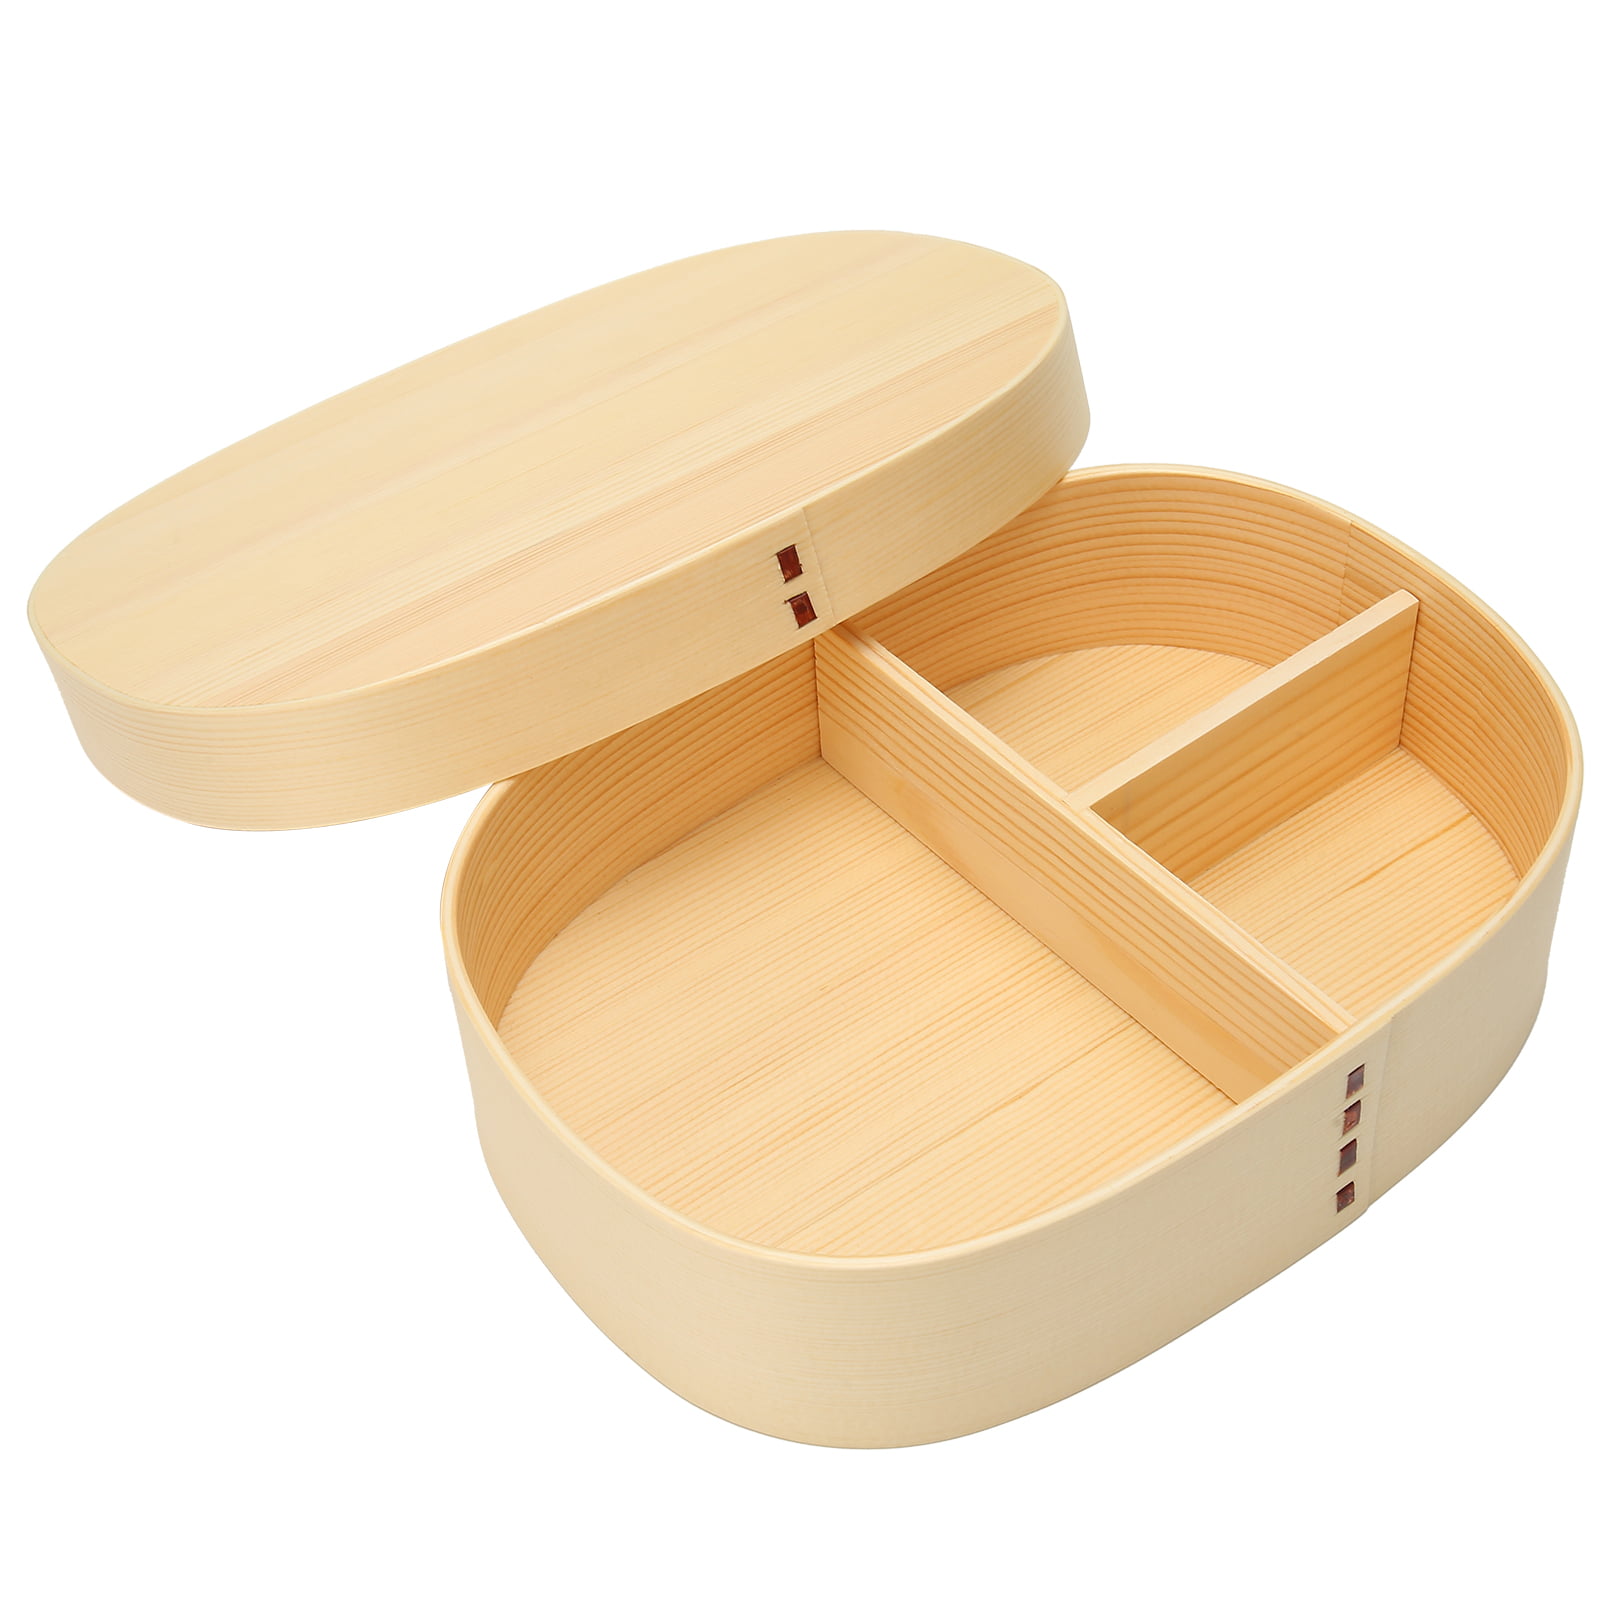 Details about   NEW BENTO BOX Cedar Wappa Lunch Box Natural Wooden Oval Container Yamako Japan 